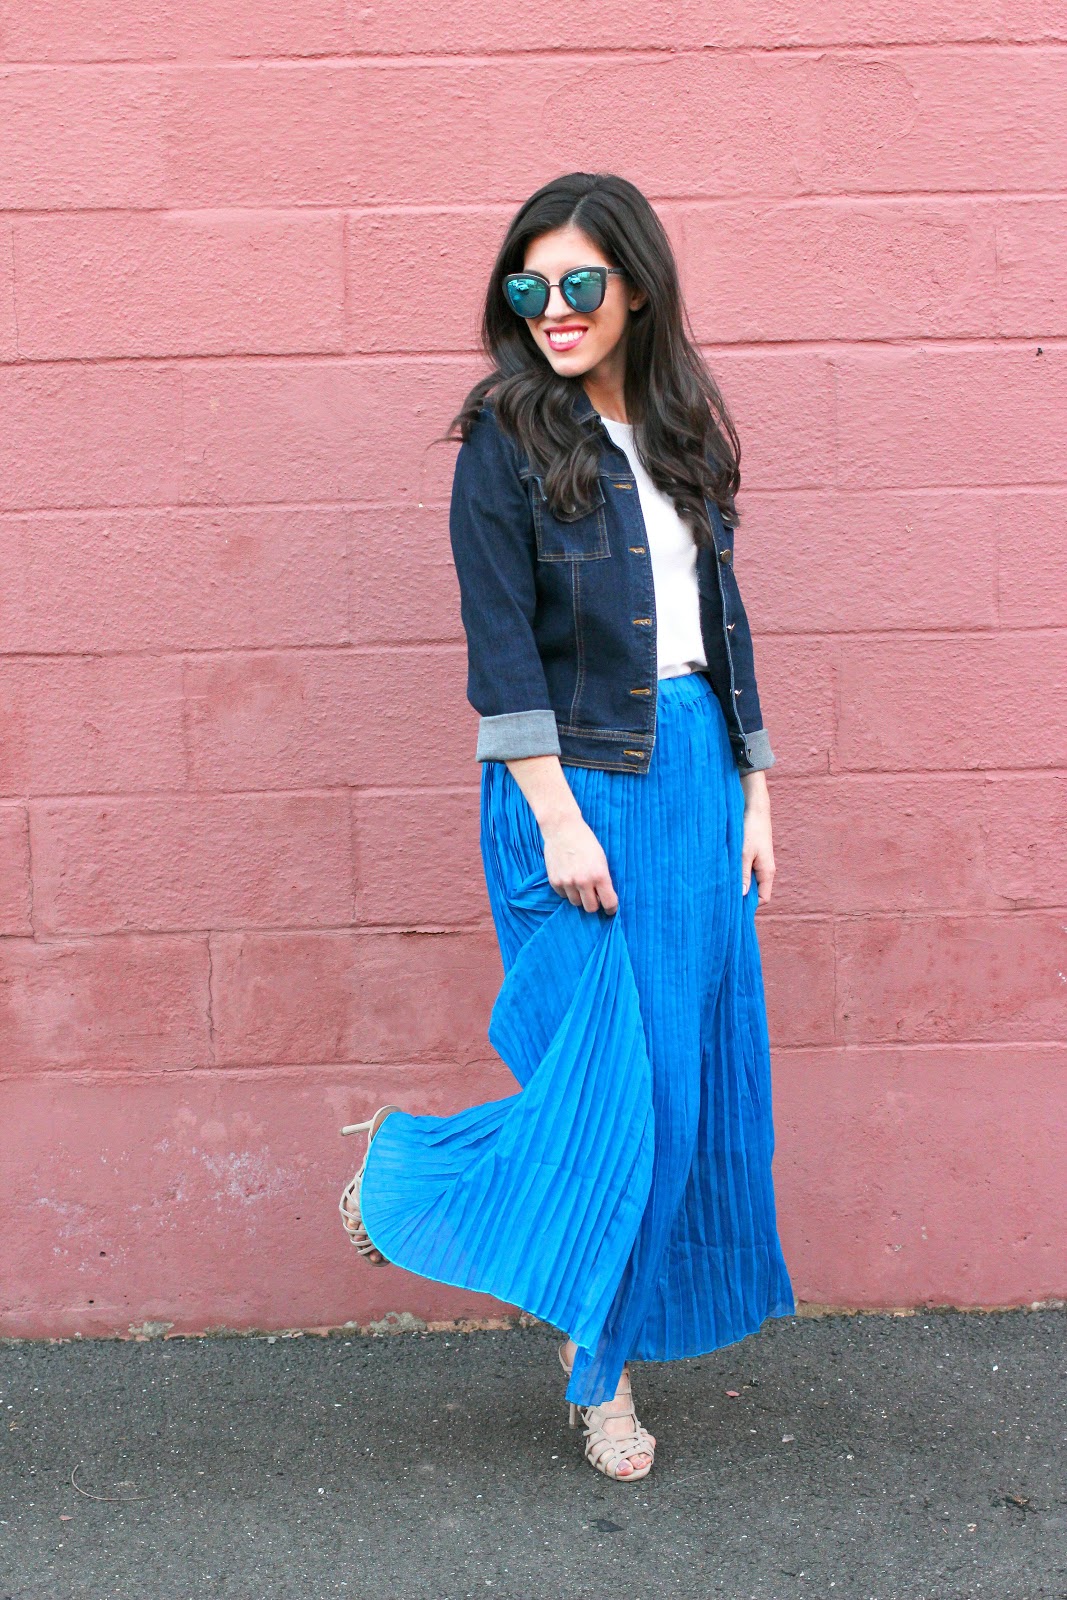 Beautifully Candid: Maxi Pleated Skirt and Denim Jacket